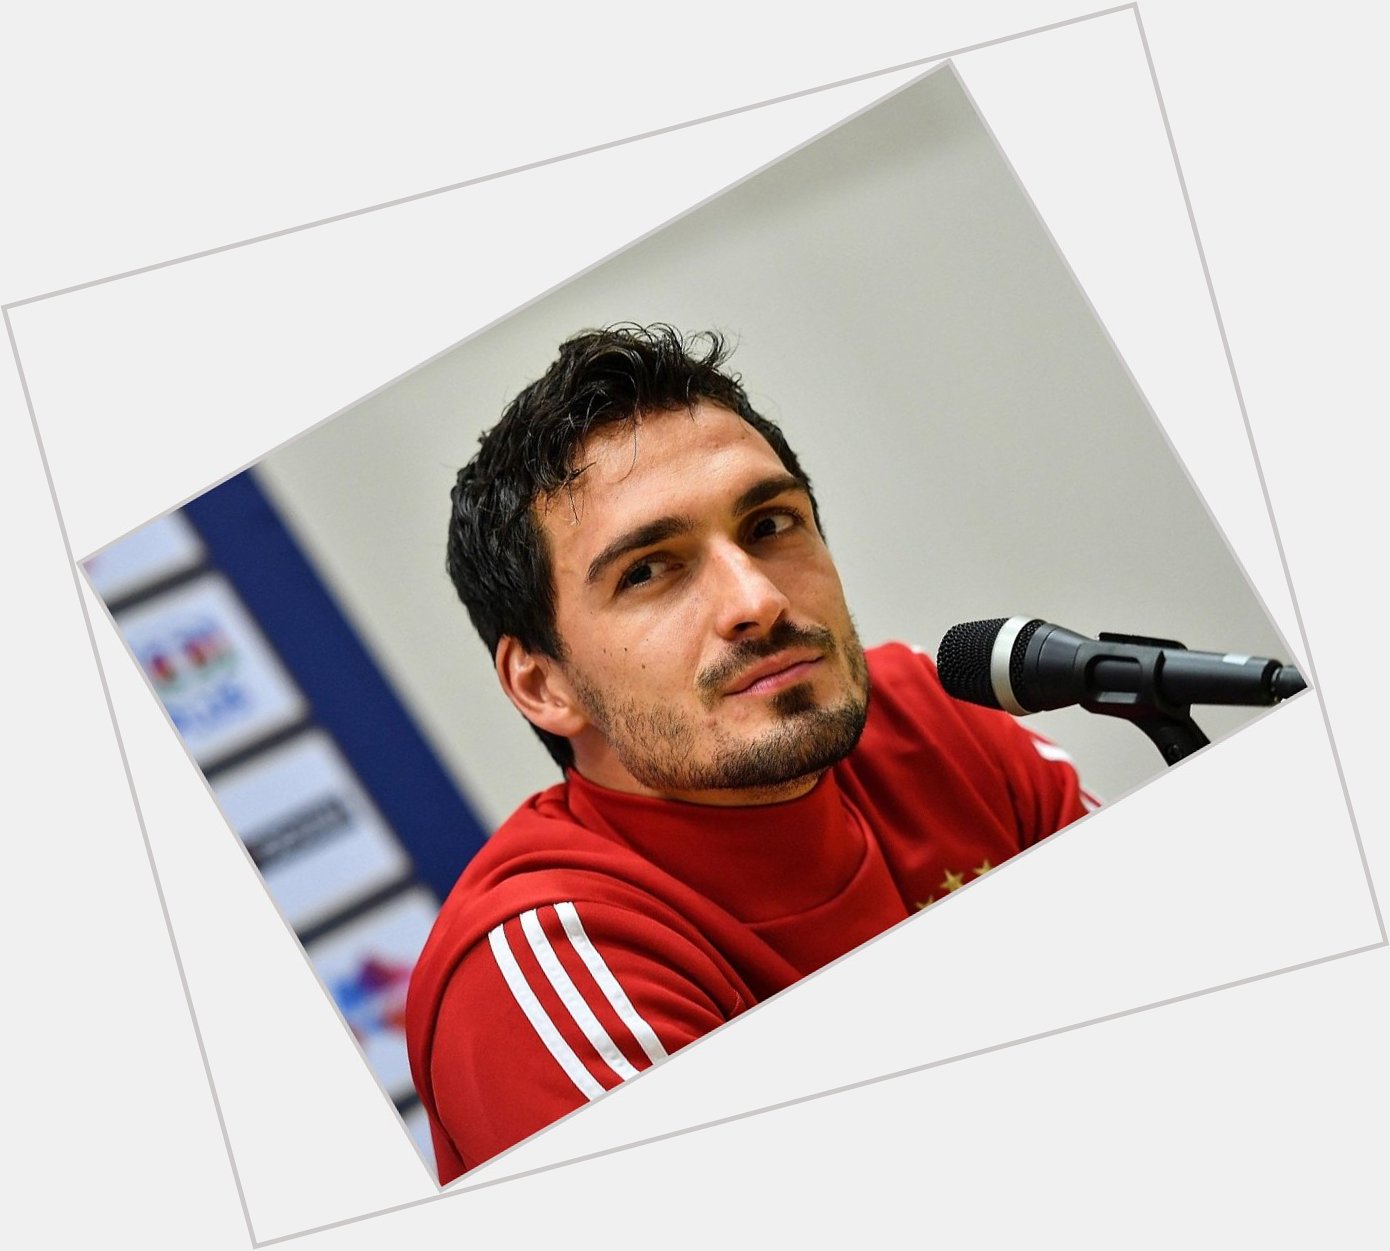 Happy birthday to Bayern Munich and Germany defender Mats Hummels, who turns 29 today! 